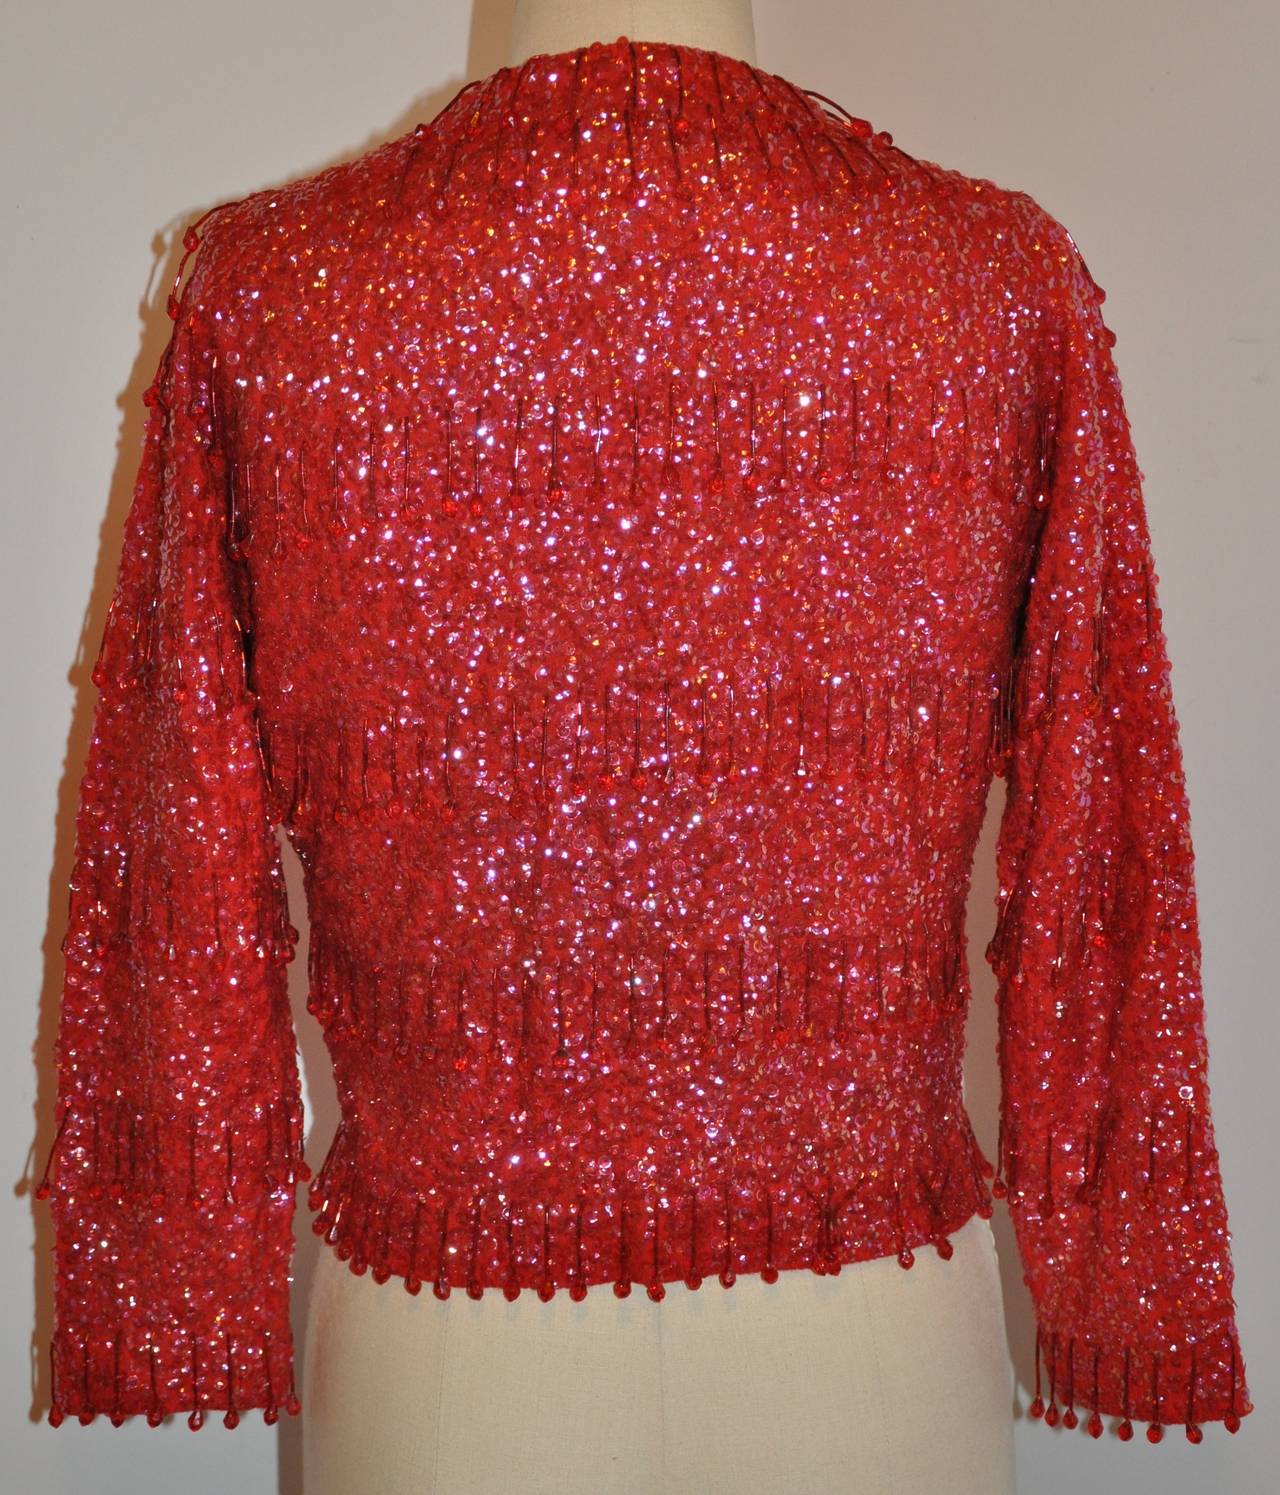 This wonderfully ruby-red angora cardigan is hand-beaded with micro sequins and micro glass seed beading throughout.
   The shoulder measures 15 1/2